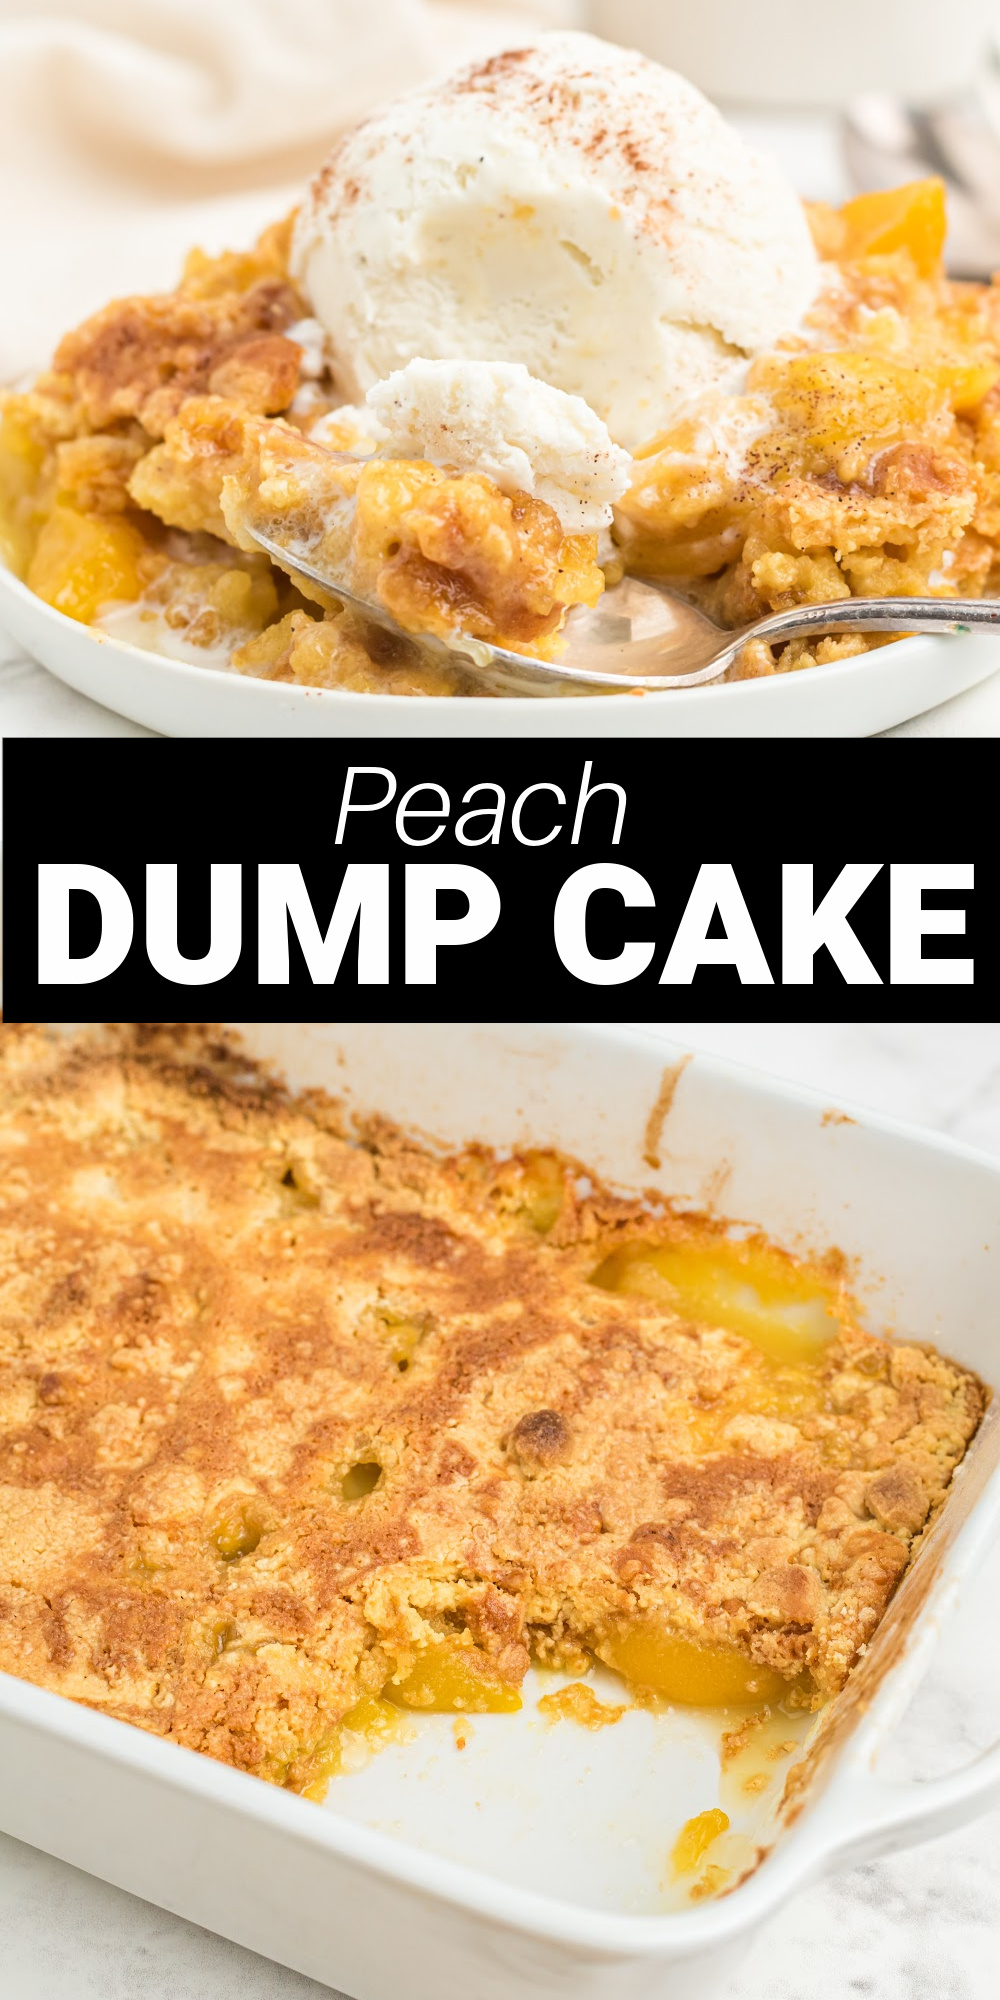 This homemade peach dump cake takes just 4 easy ingredients and tastes like everything you'd hope for summer to be. It's like a warm peach cobbler bursting with peach flavor!